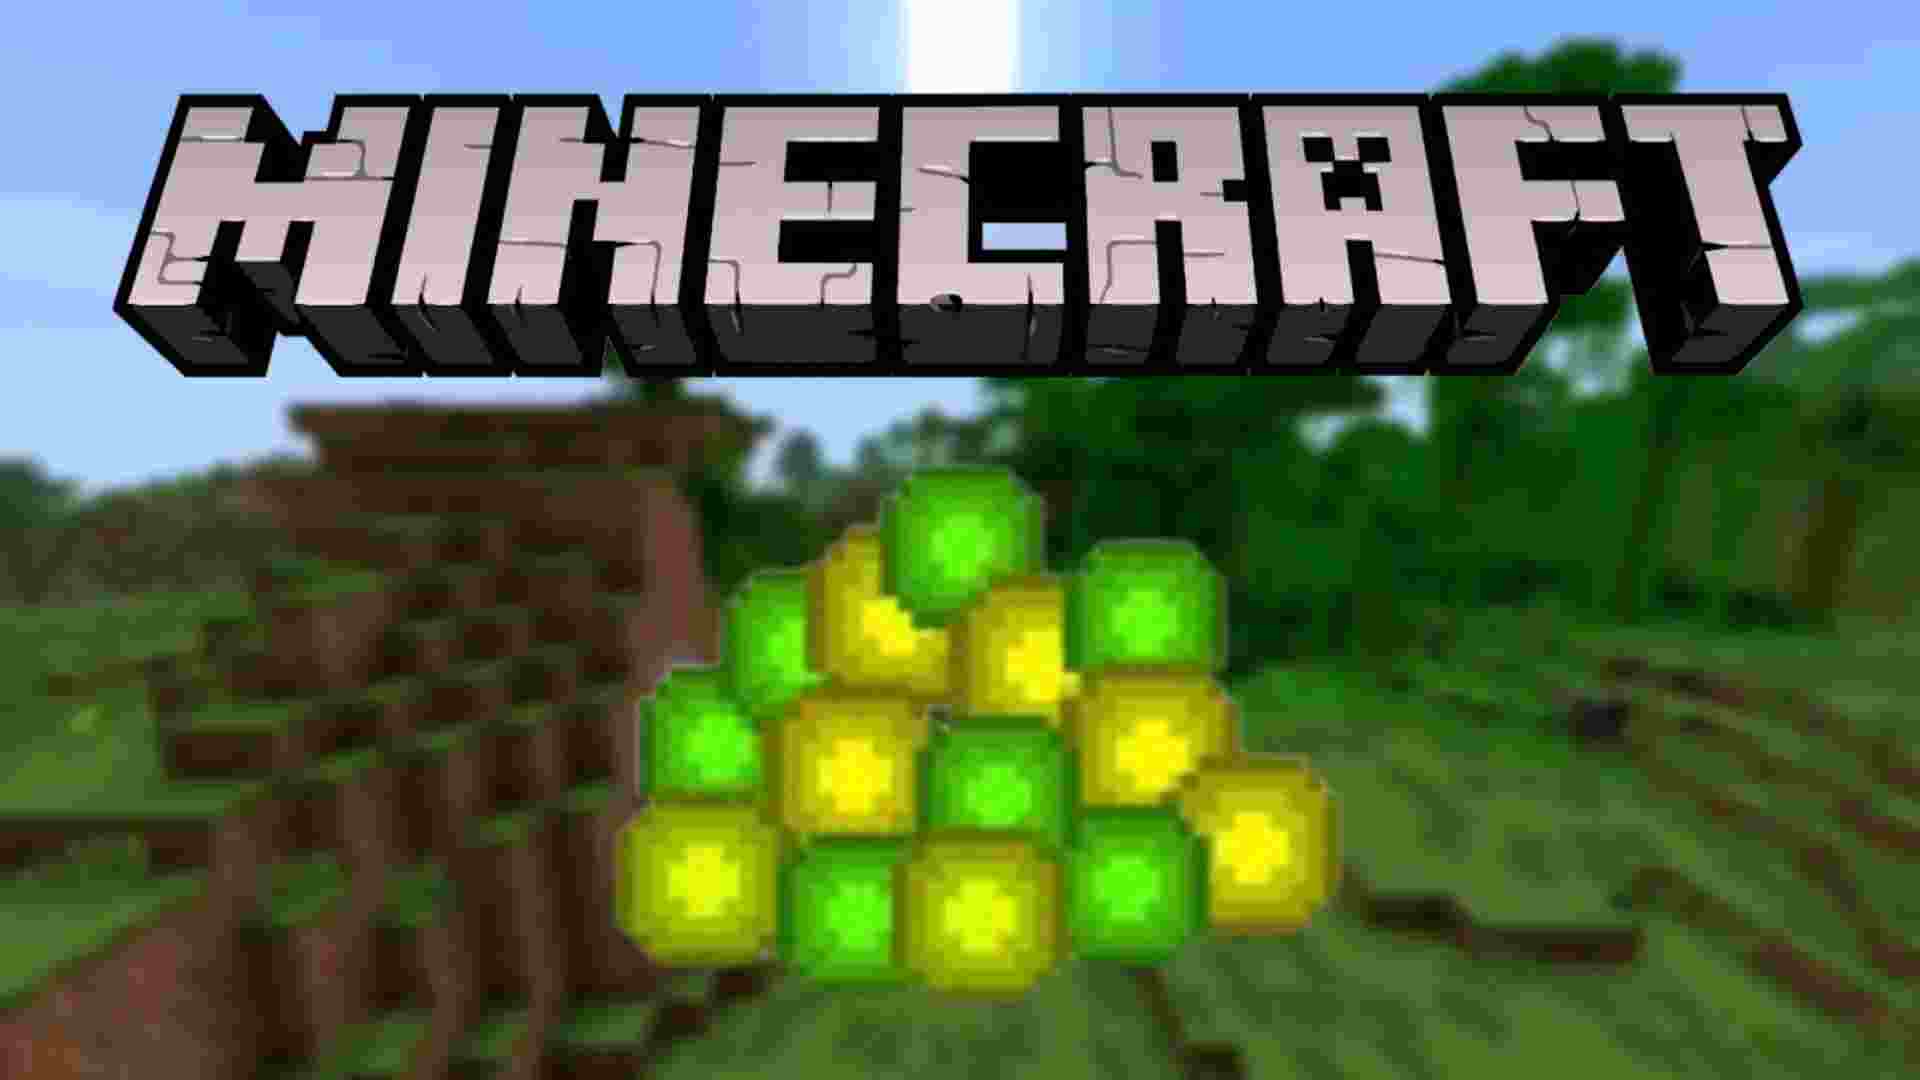 Top 5 Minecraft mobs that give the most XP in 2022